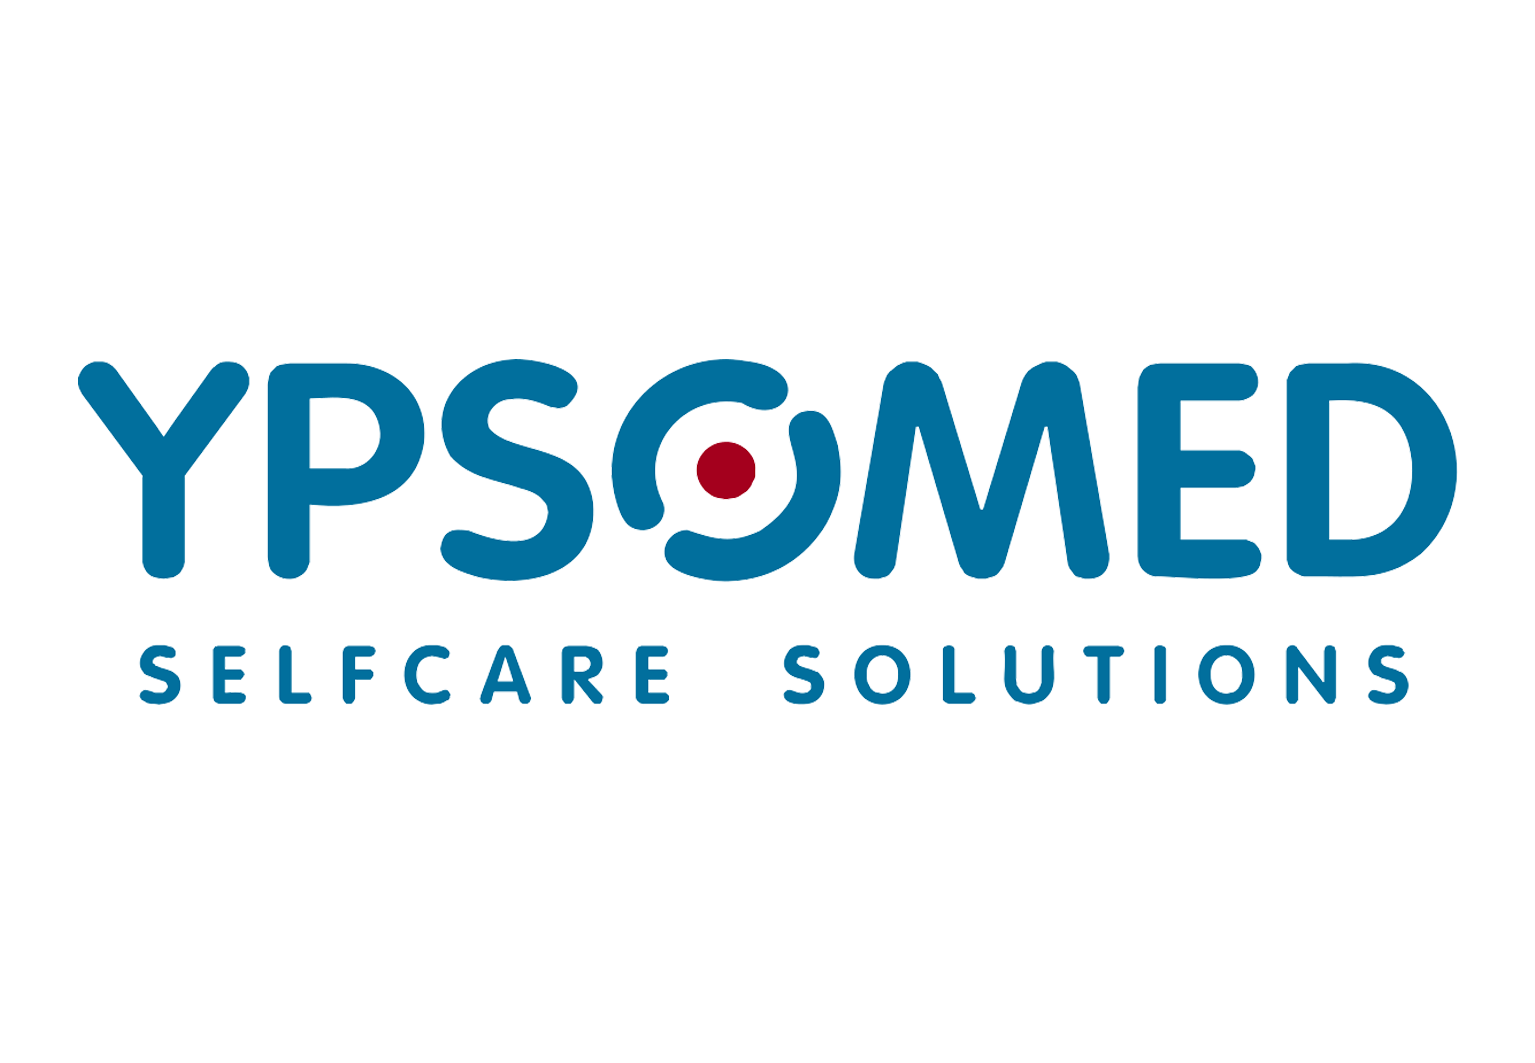 YPSOMED